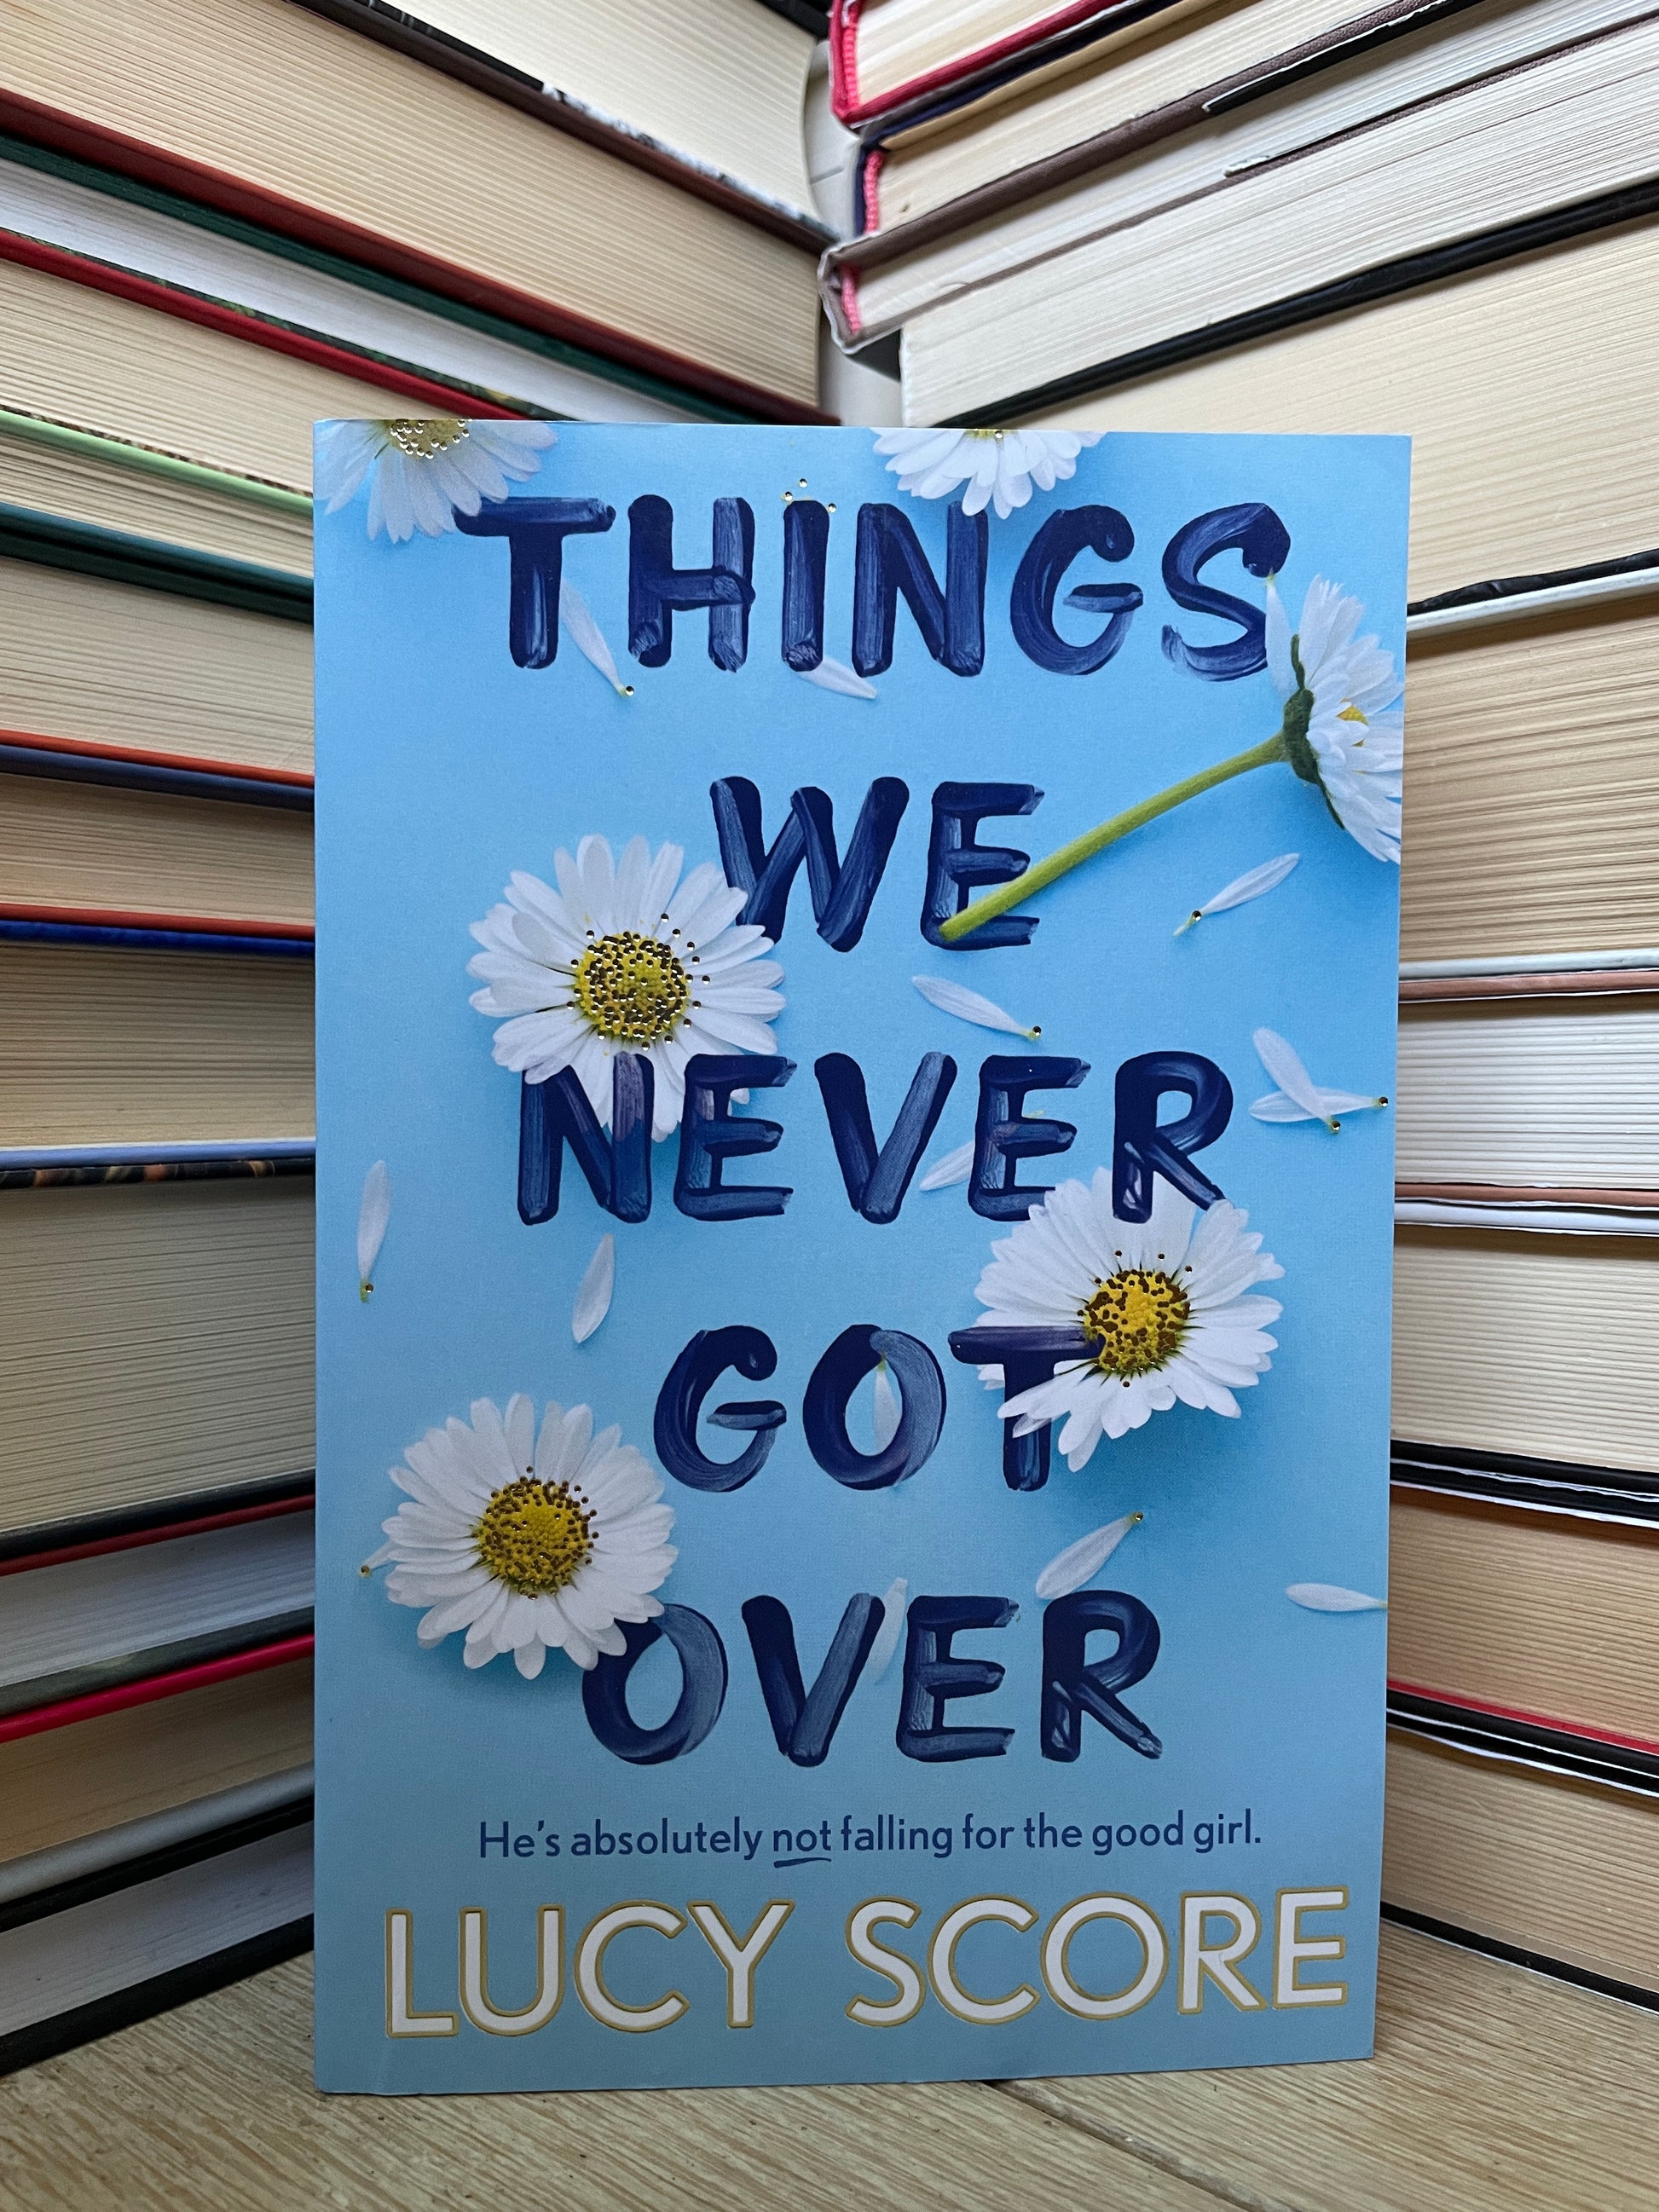 Things We Never Got Over by Lucy Score